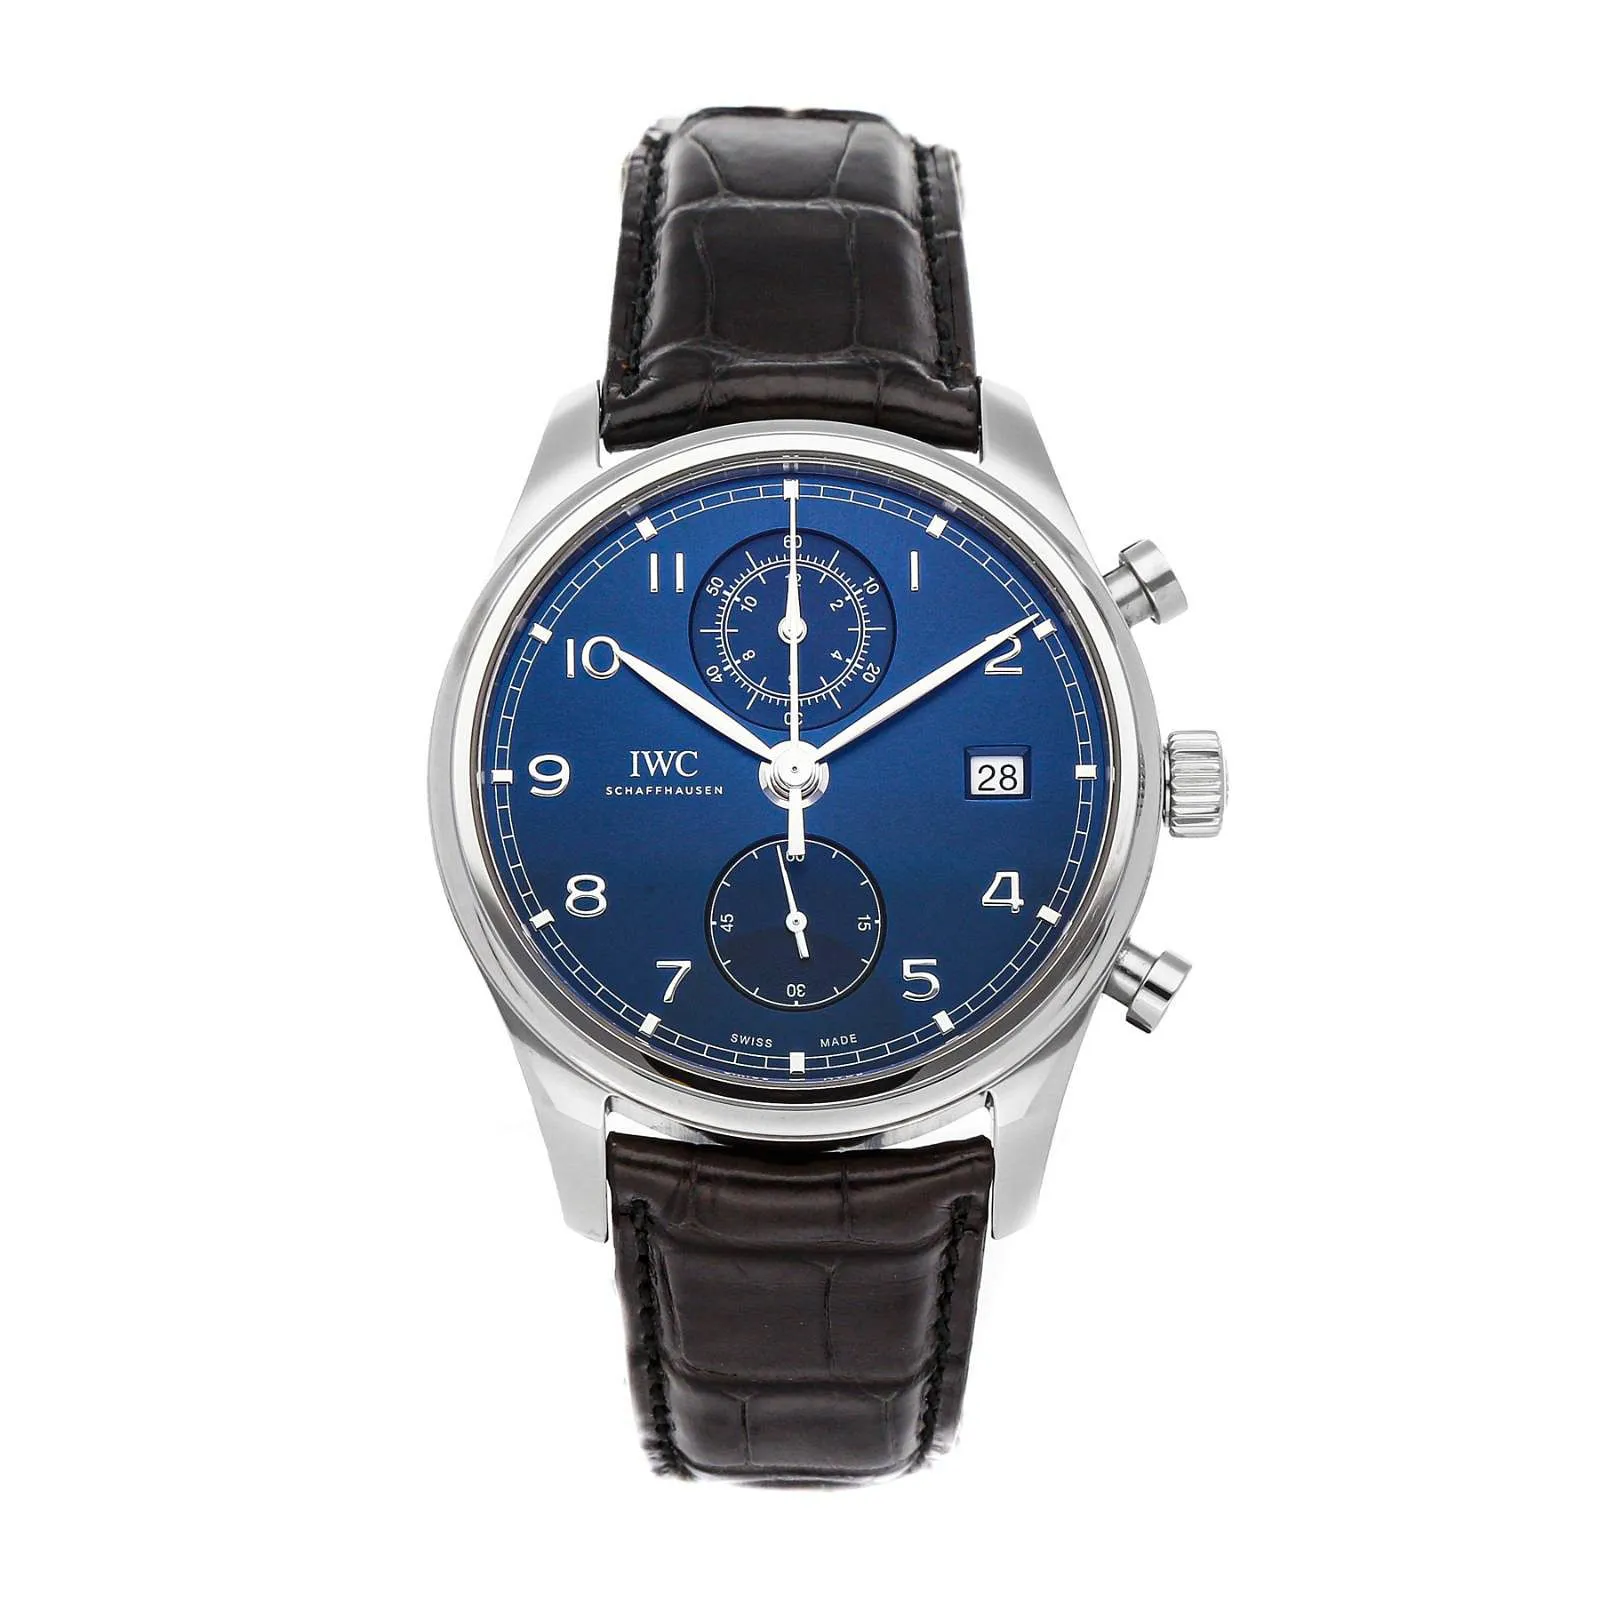 IWC Portugieser Chronograph nullmm Stainless steel Blue